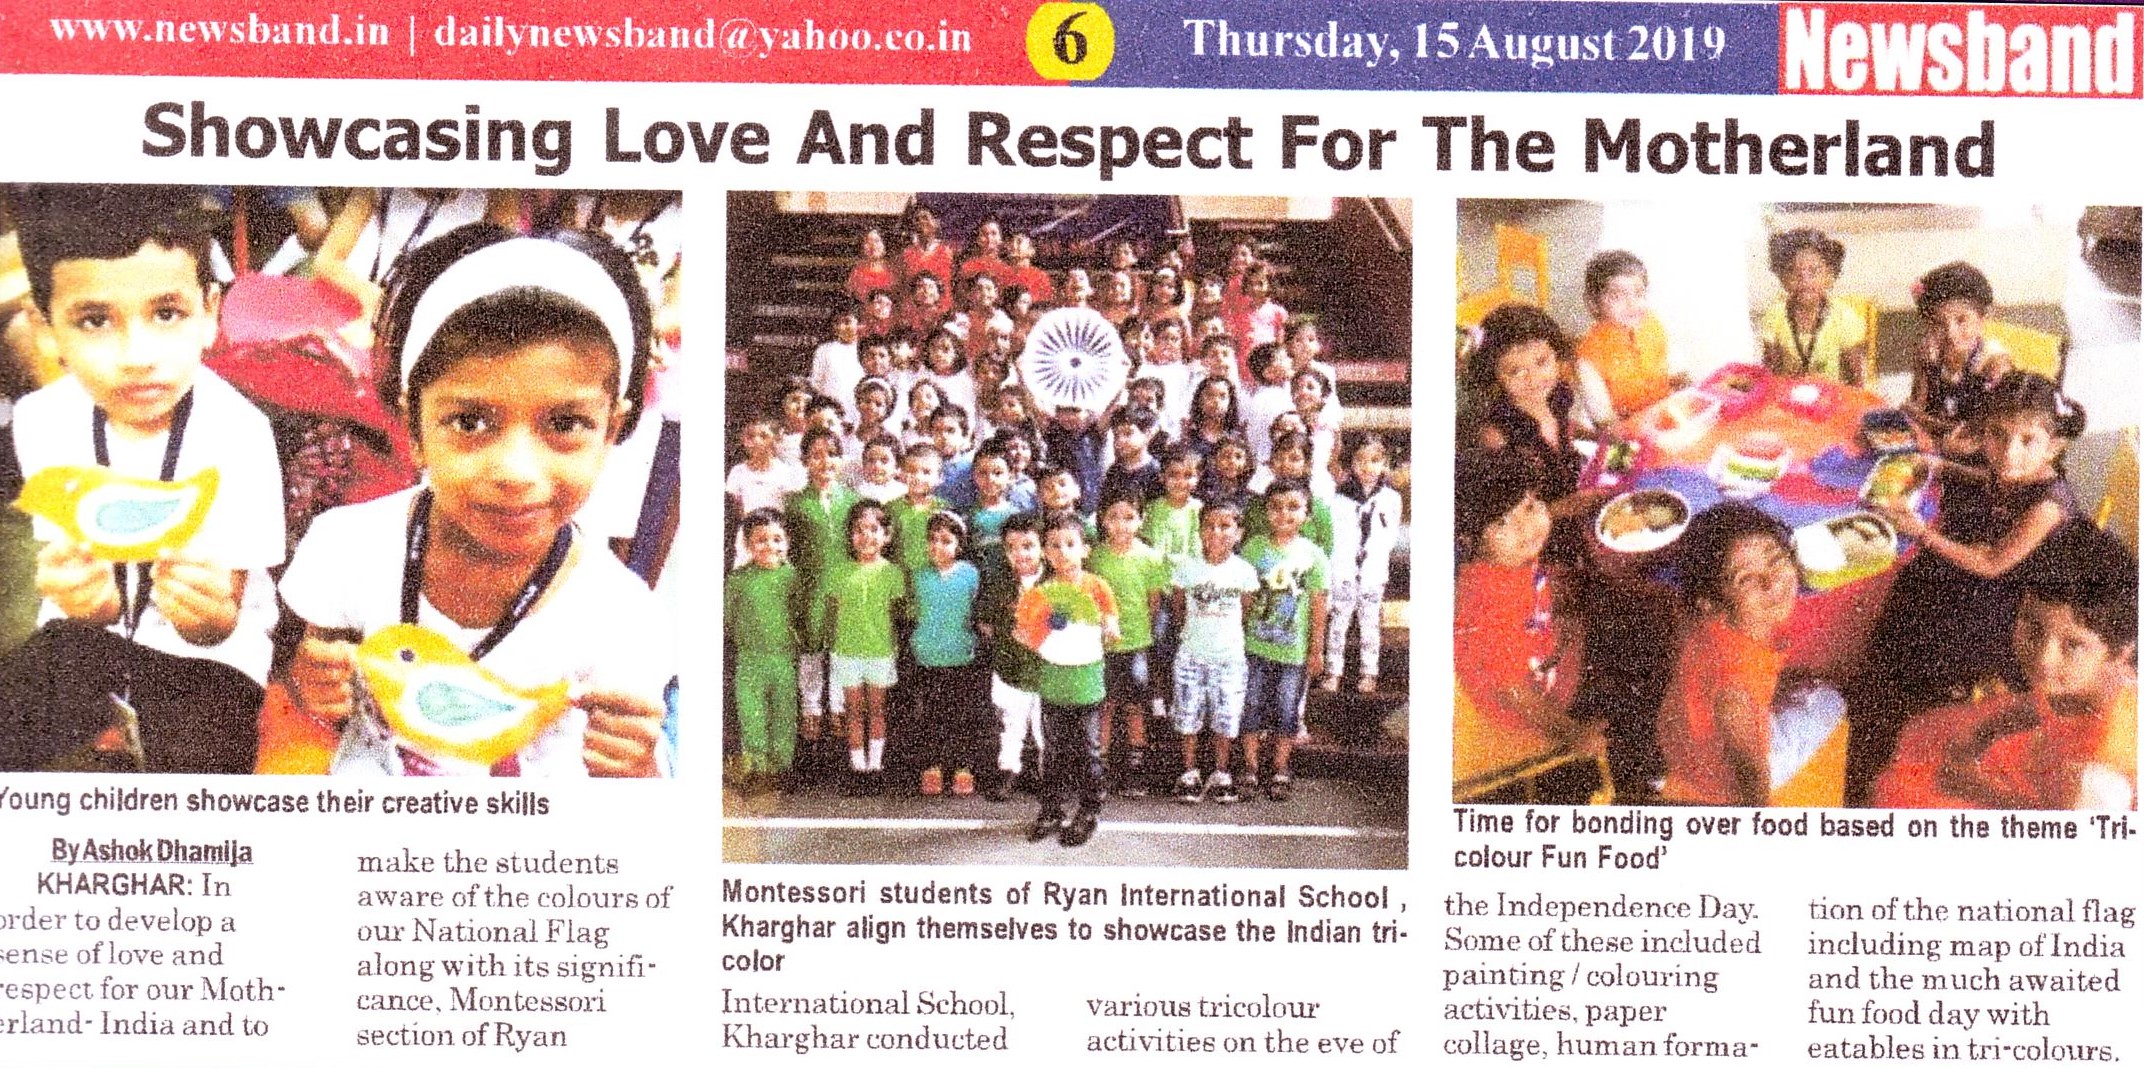 Showcasing love and respect for the motherland was mentioned in News band - Ryan International School, Kharghar - Ryan Group